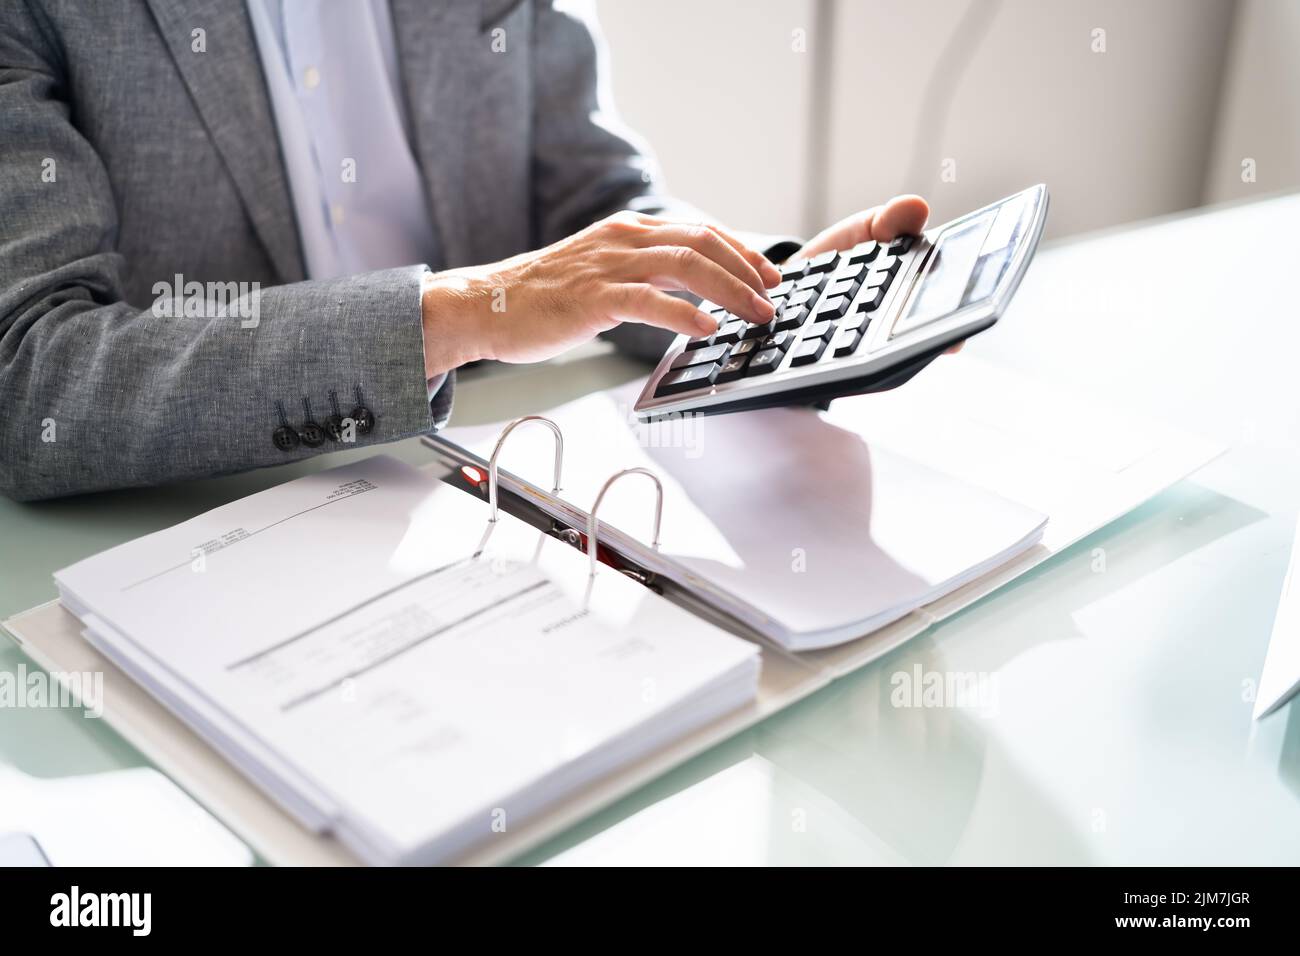 Lady Calculating Invoice. Chartered Accountant With Calculator Stock Photo